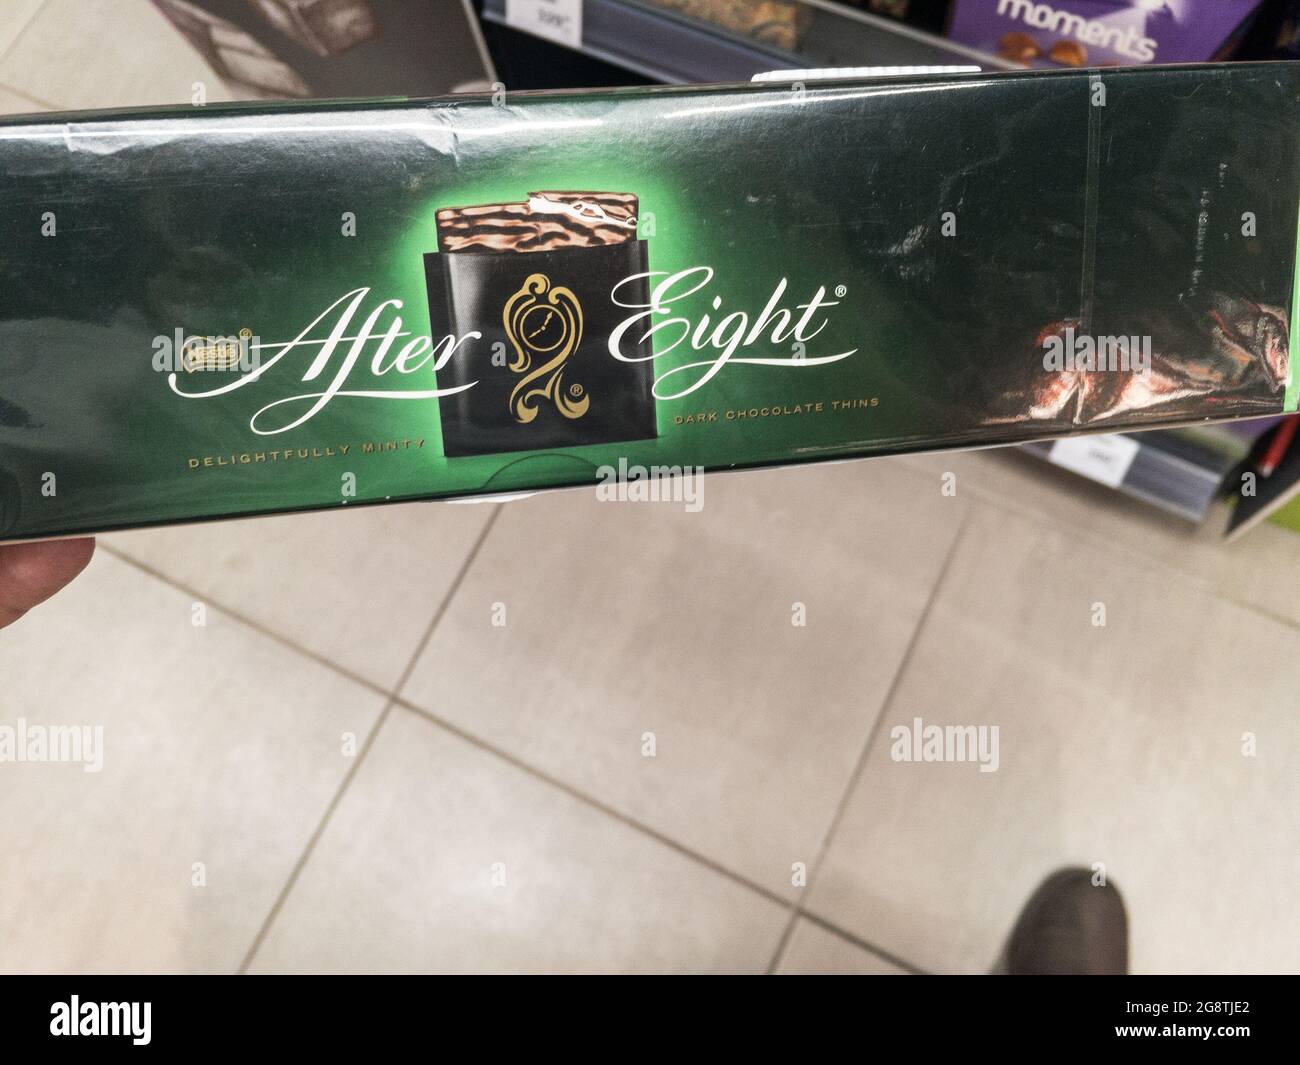 Picture of a chocolate box with the logo of atern Eight. After Eight Mint Chocolate Thins, often referred to as simply After Eights, are a brand of mi Stock Photo